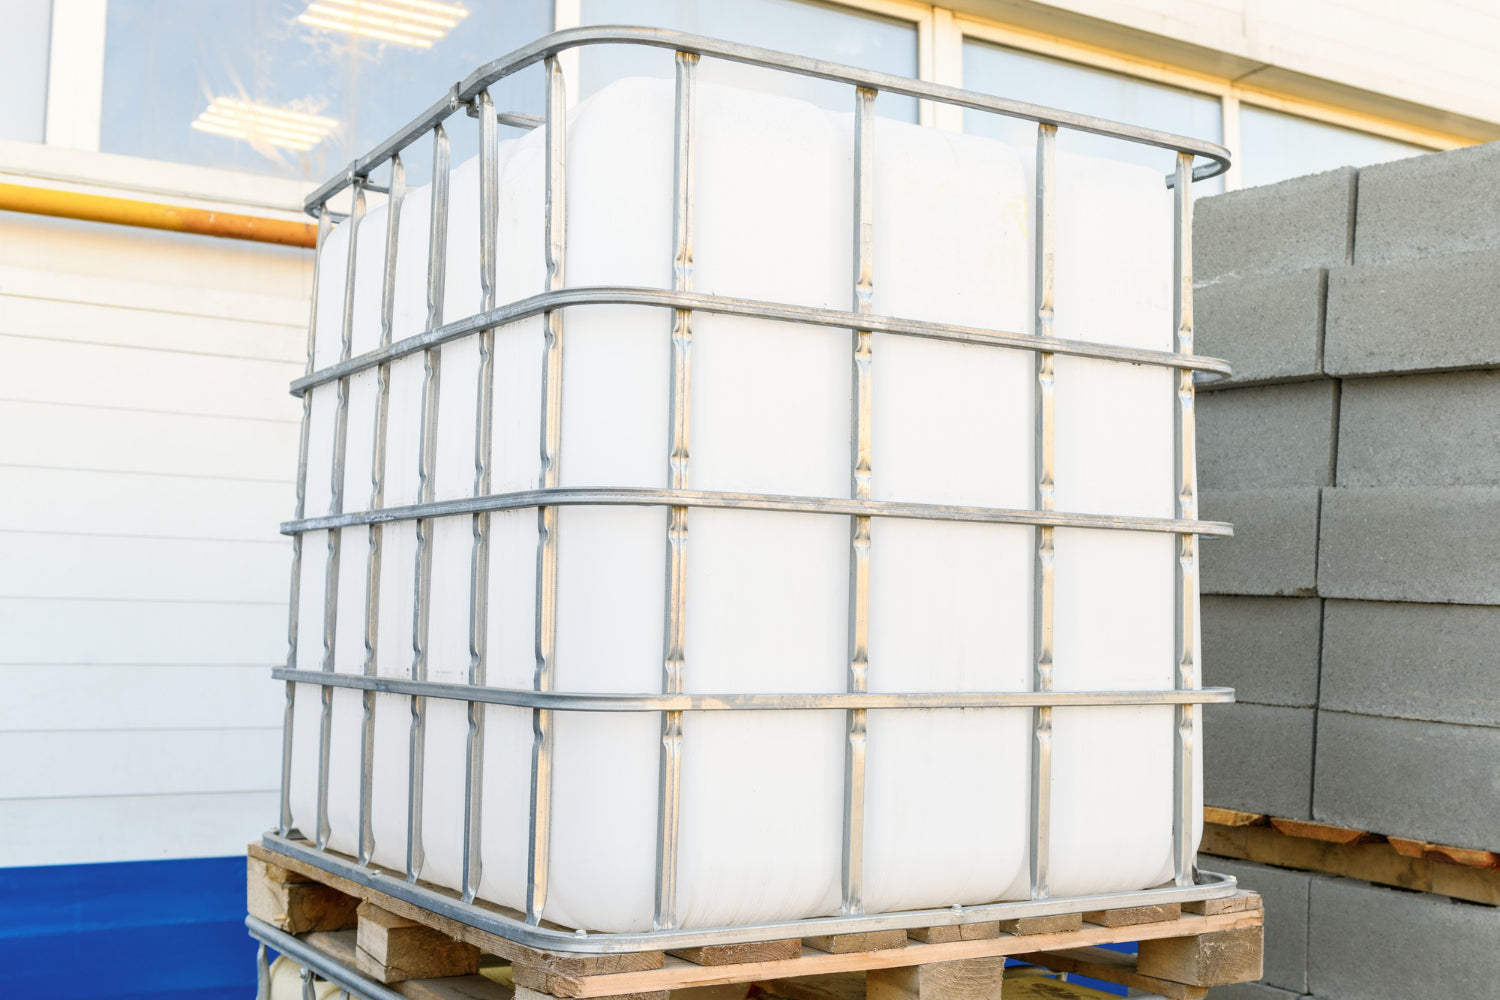 Comprehensive Guide to the Different Types of IBC Covers